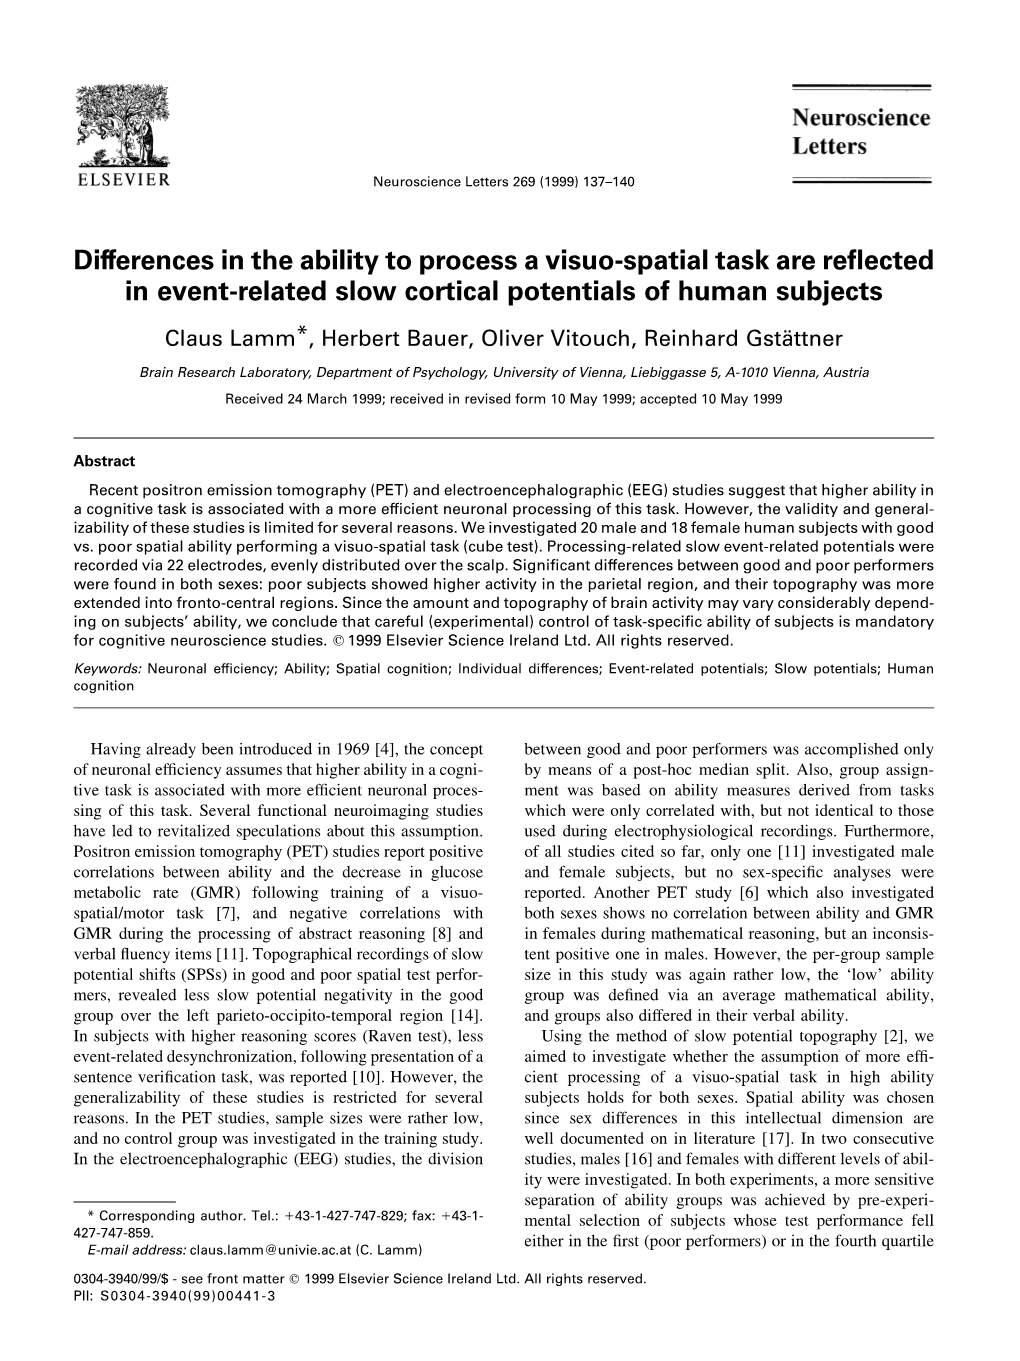 Differences in the Ability to Process a Visuo-Spatial Task Are Reflected In